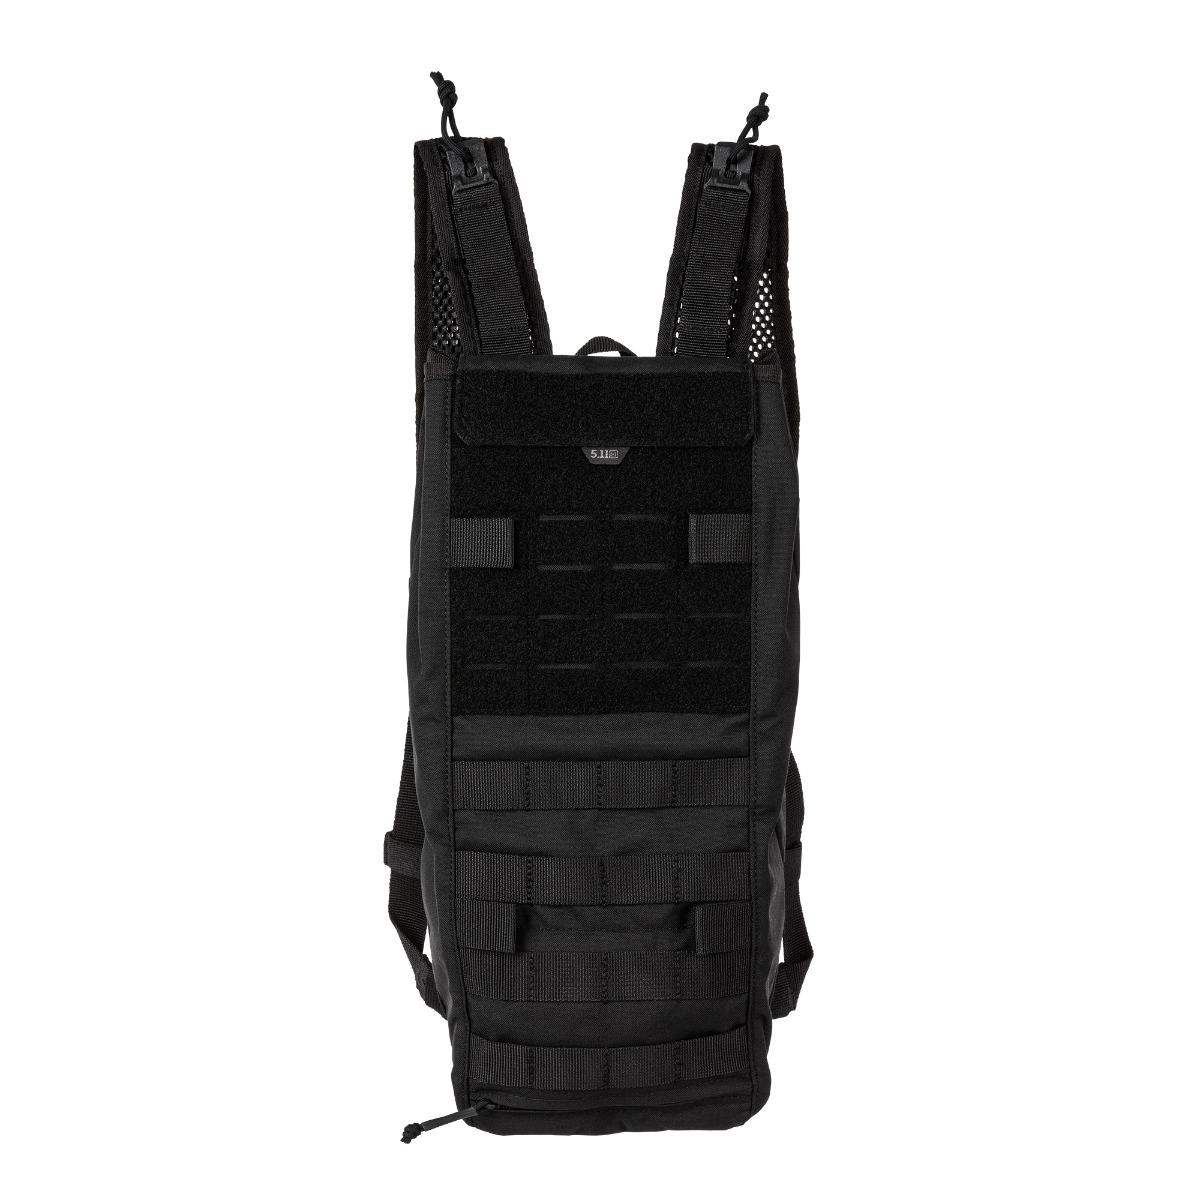 Image of 5.11 Tactical Convertible Hydration Carrier